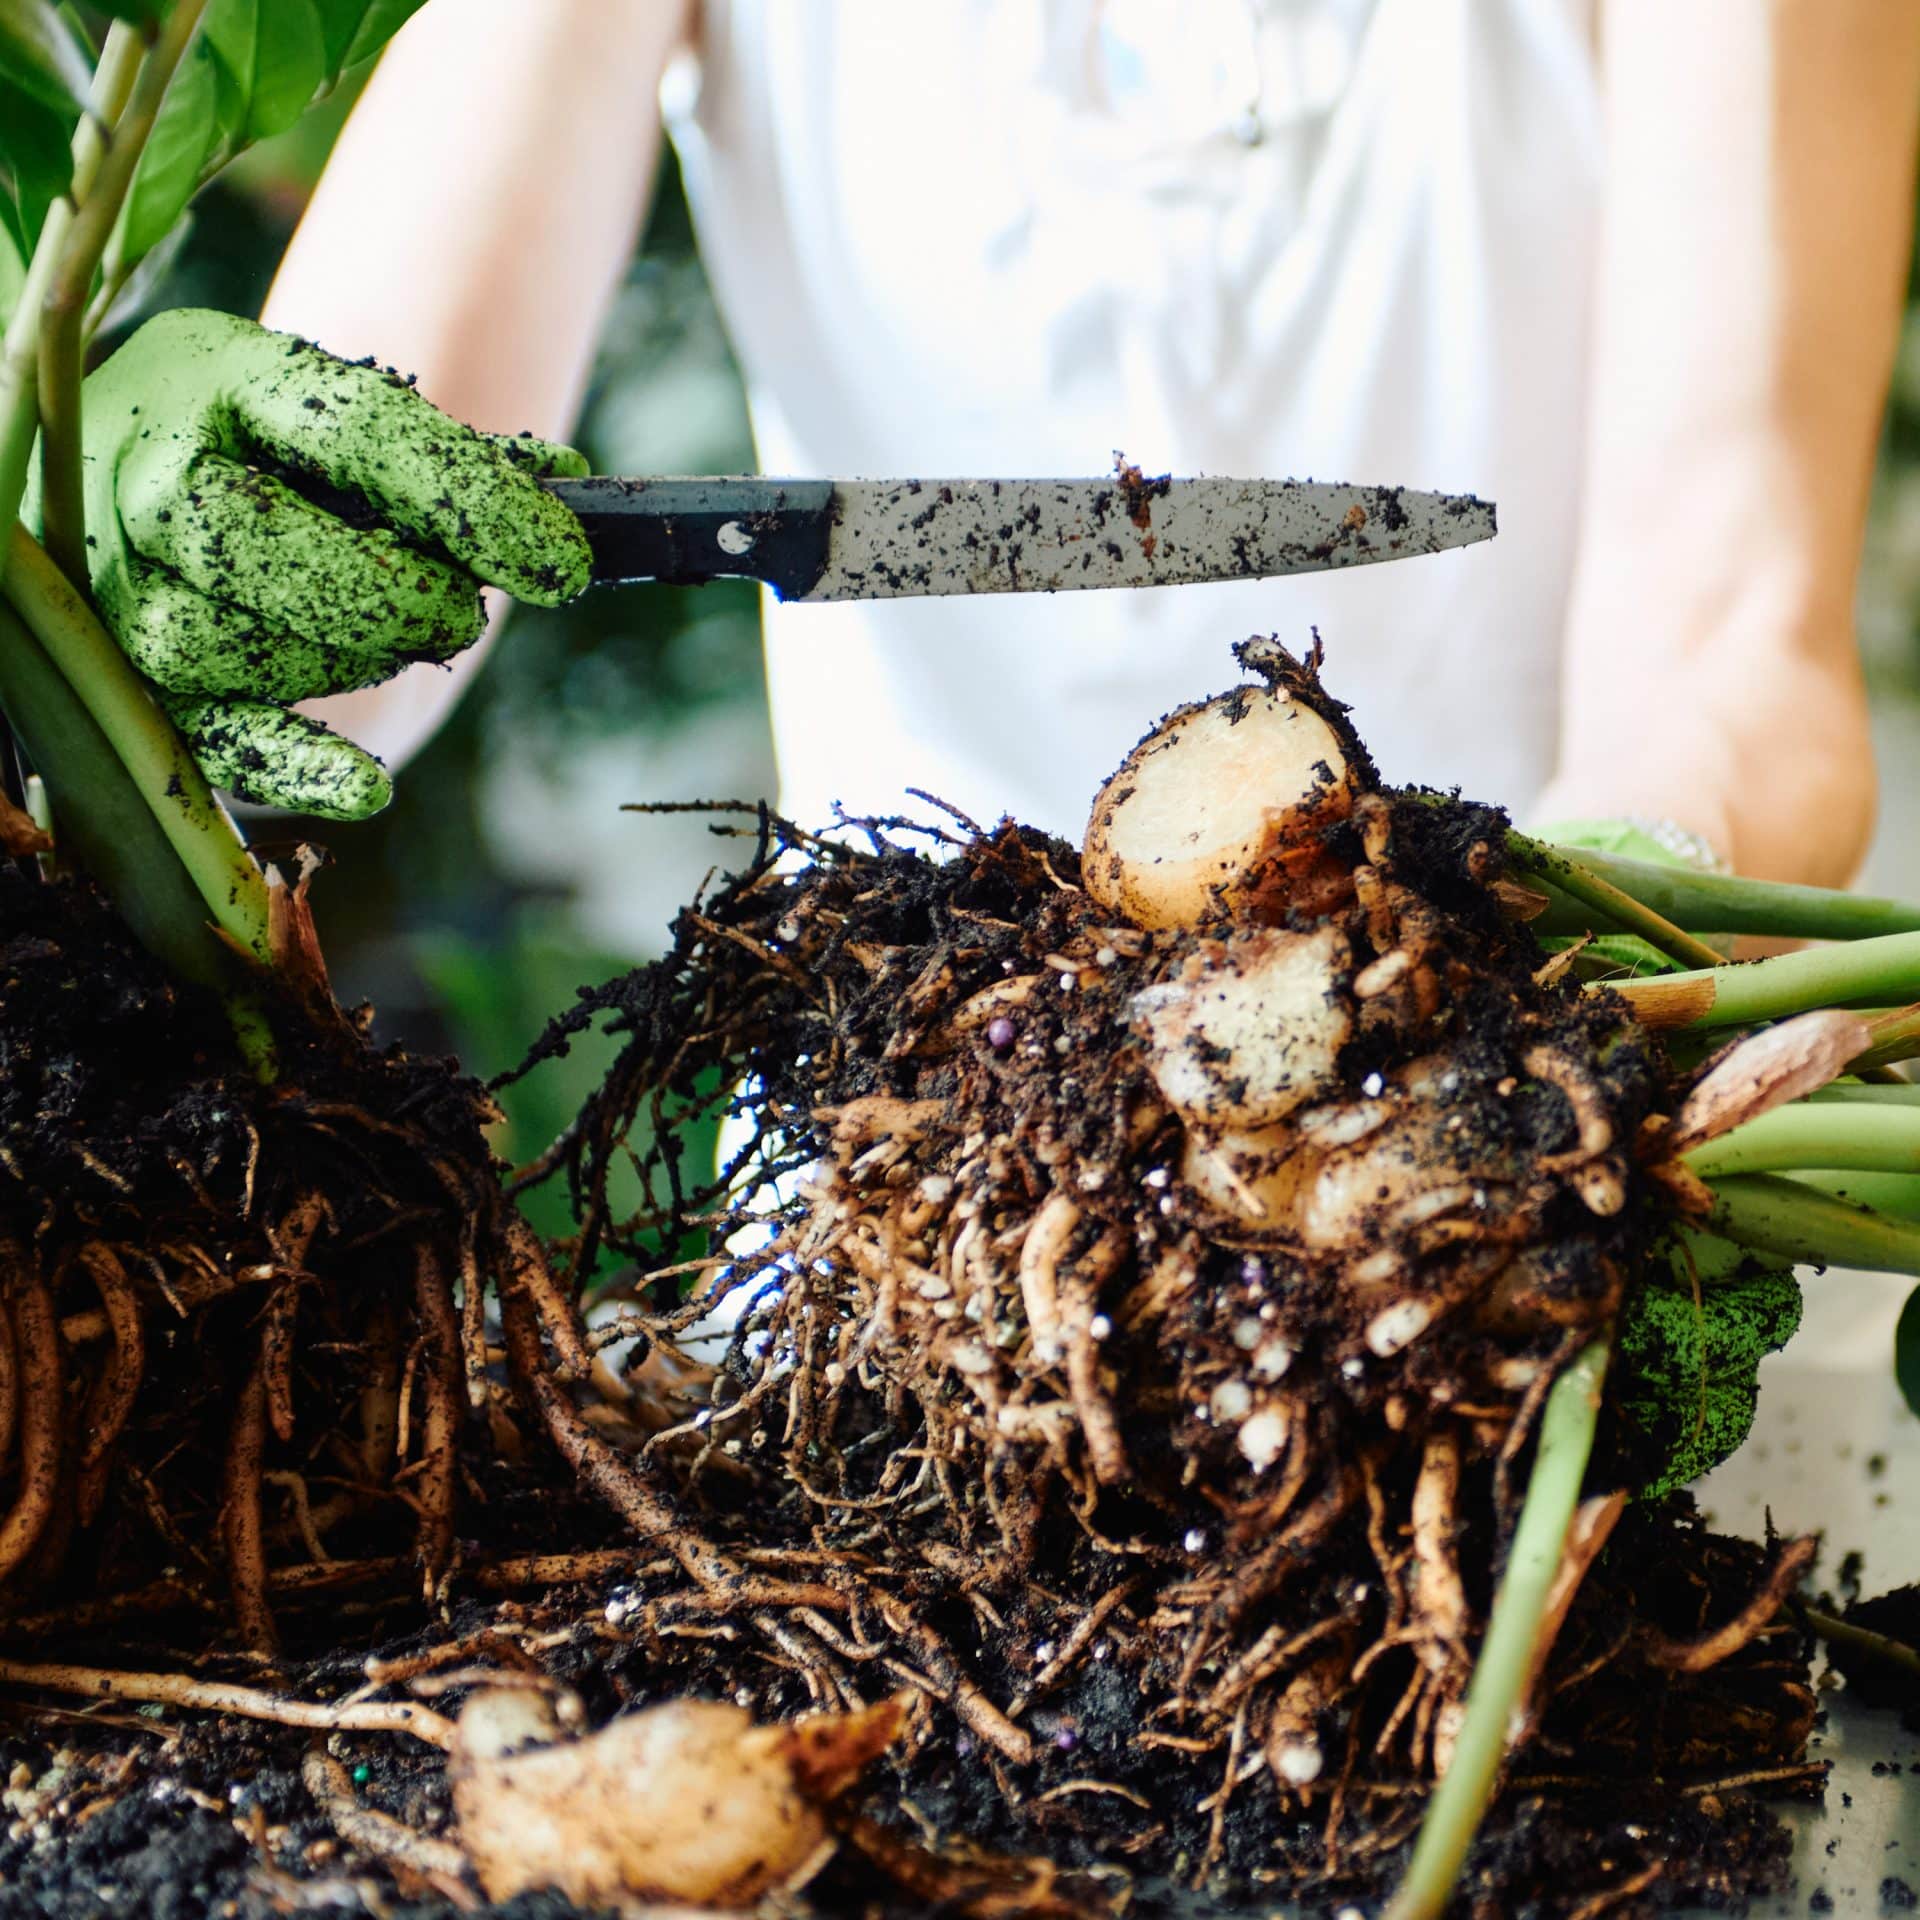 A gardener wearing green gloves uses a sharp knife to cut through the rhizomes of a ZZ plant. The focus is on the knife slicing a thick rhizome, with other rhizomes and roots prominently displayed. The soil is dark and rich, and the green stems and leaves of the plant are visible in the background.